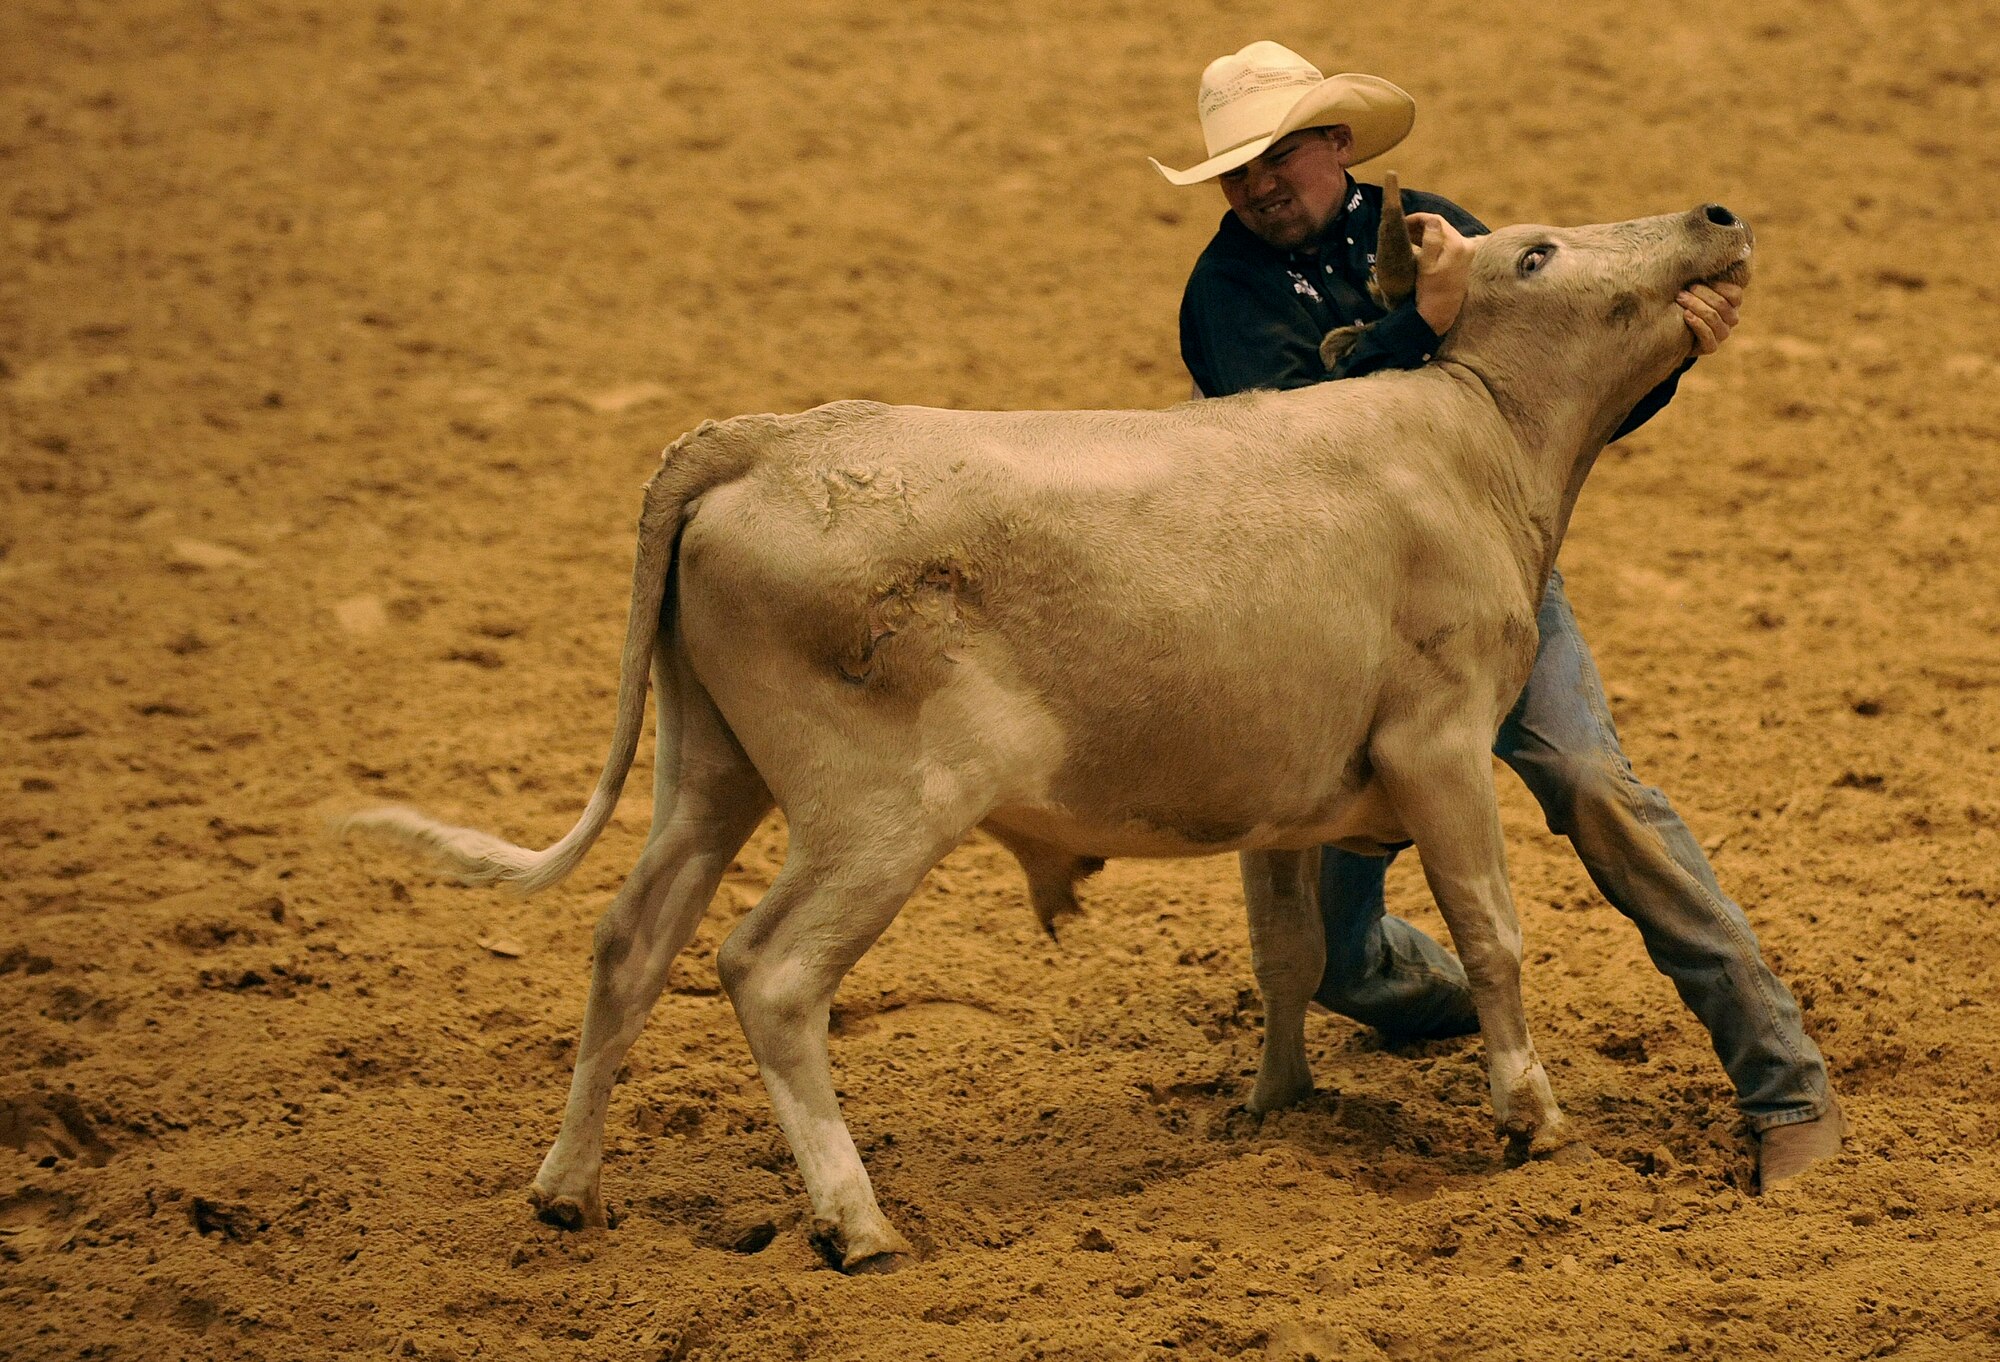 Staff Sgt. R.J. Eppers tries to wrestle a steer during the chute dogging competition at the Professional Armed Forces Rodeo Associations World Finals Nov. 20, 2010, in Glen Rose, Texas. PAFRA is a professional rodeo organization founded and comprised of military members, retirees, dependents, veterans and civilian Department of Defense card holders. (U.S. Air Force photo/Tech. Sgt. Bennie J. Davis III)